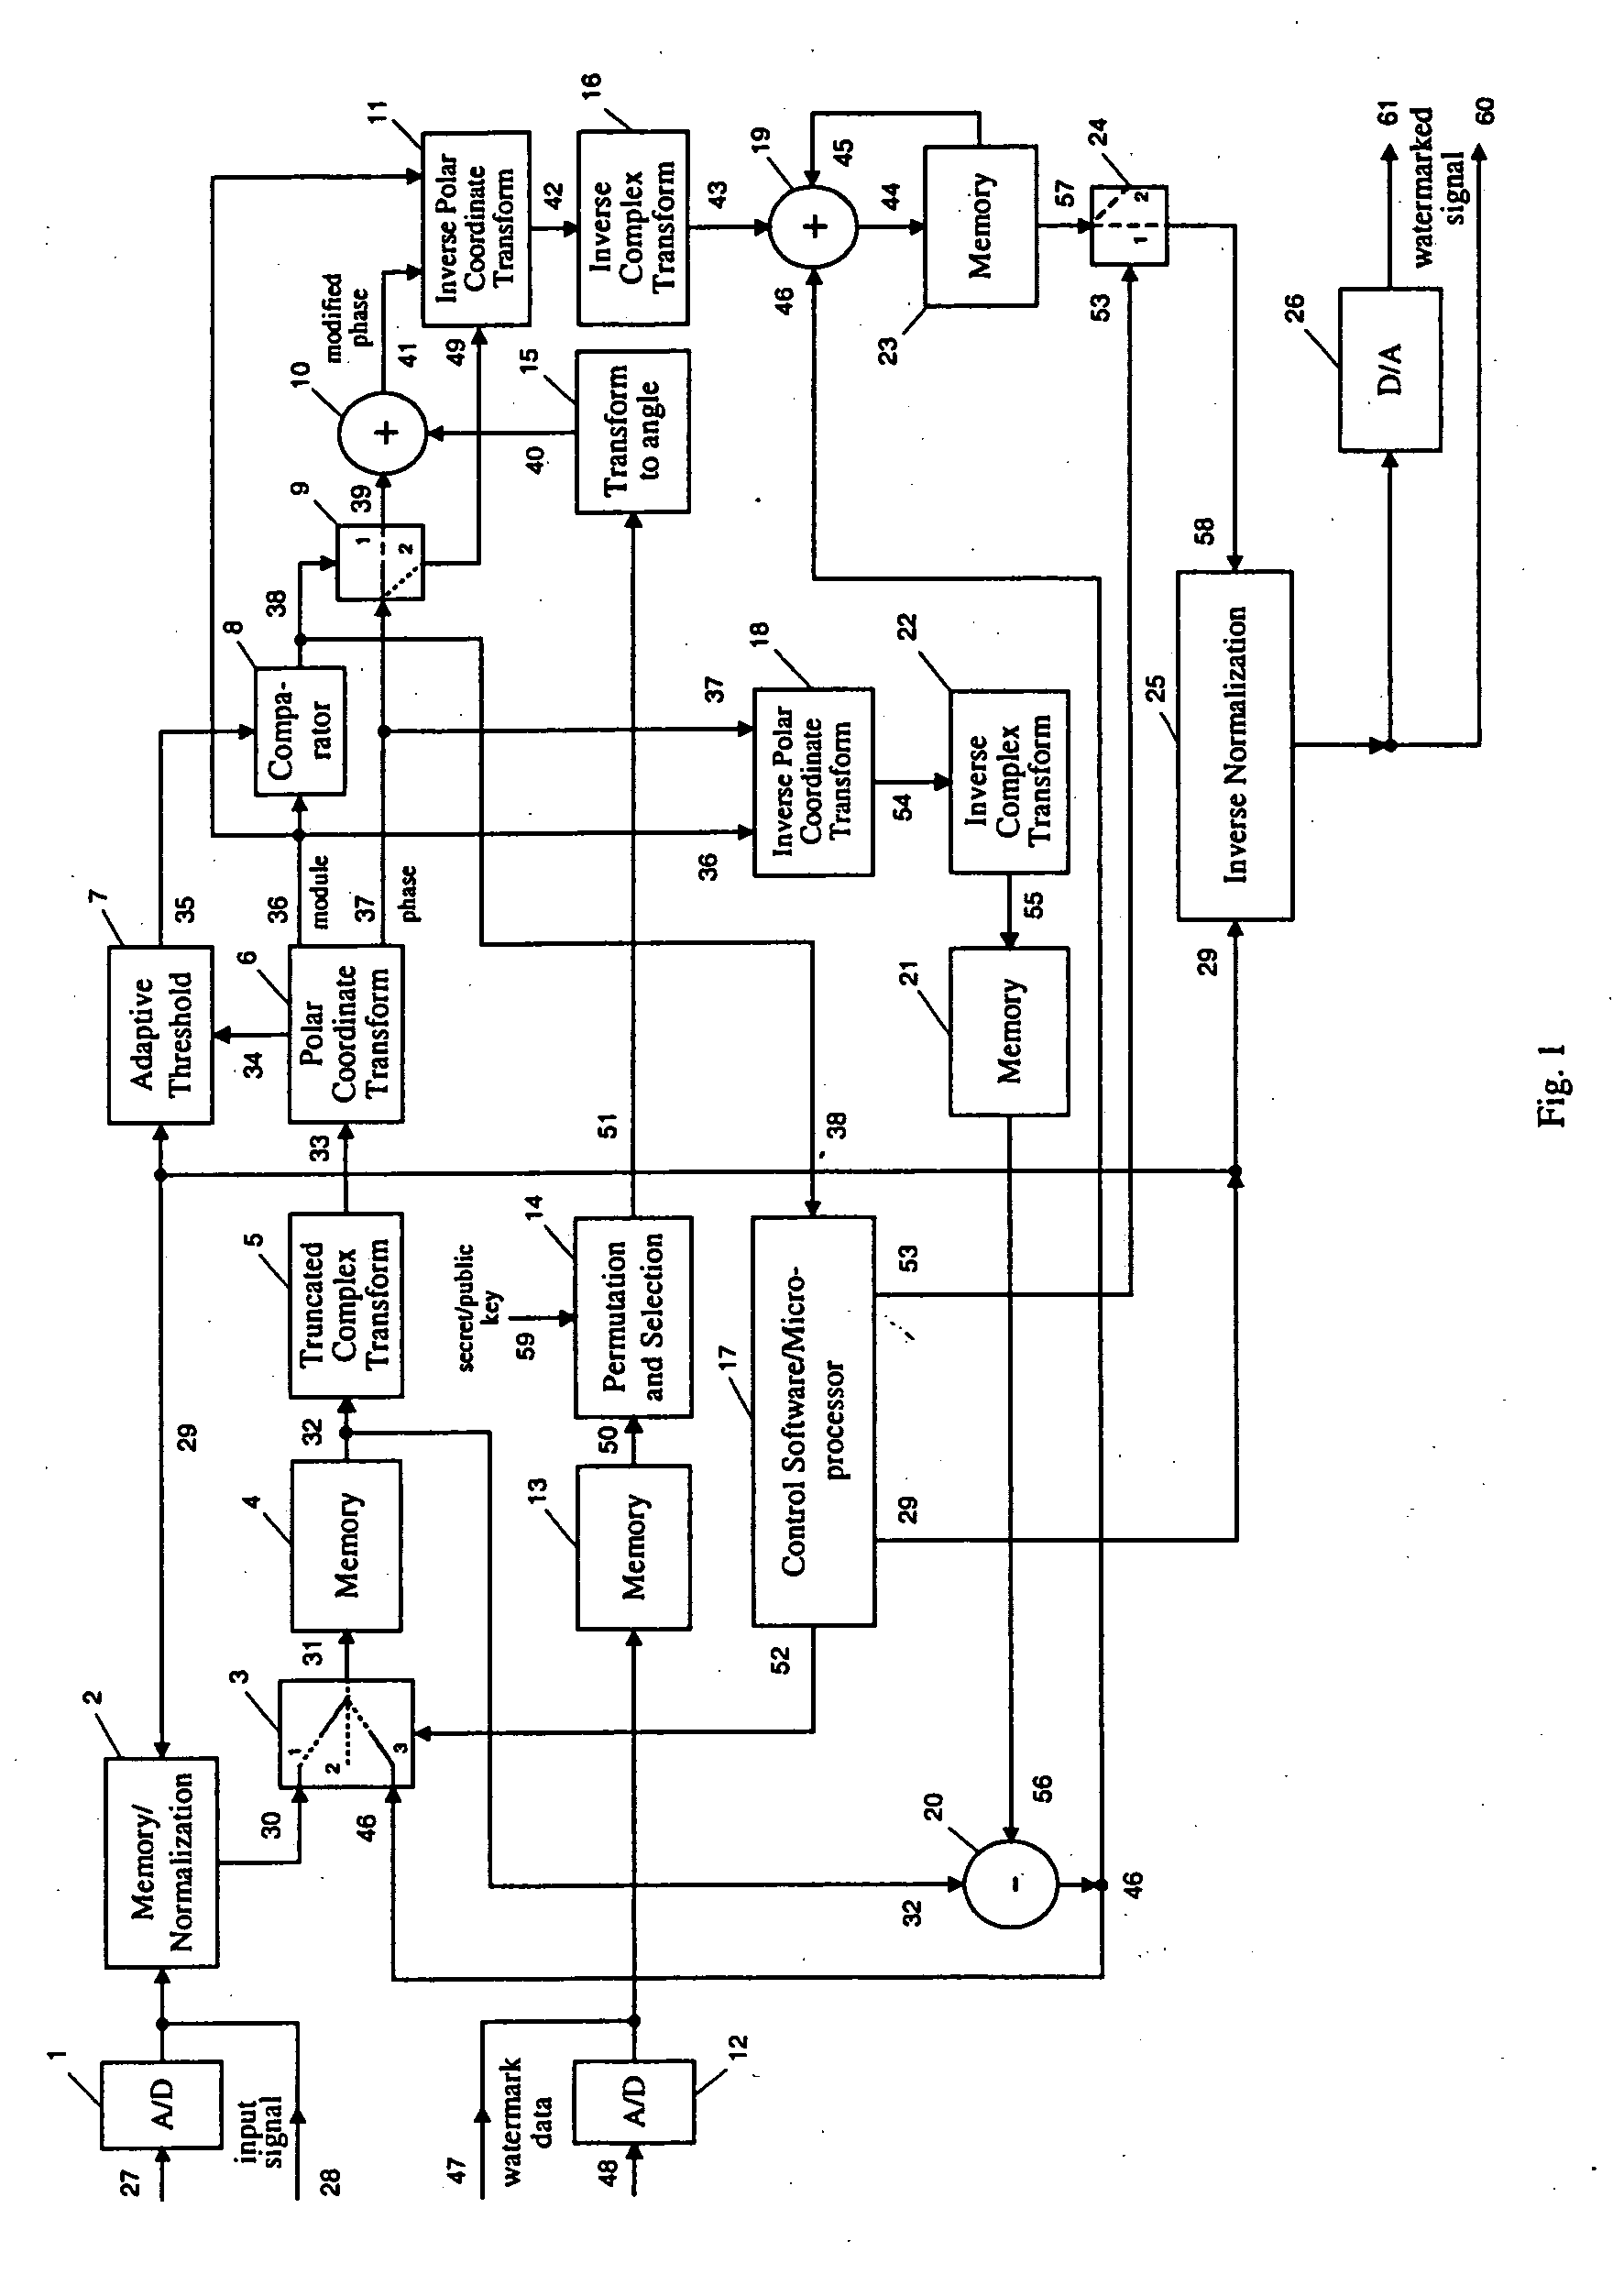 Method and system for digital watermarking of multimedia signals